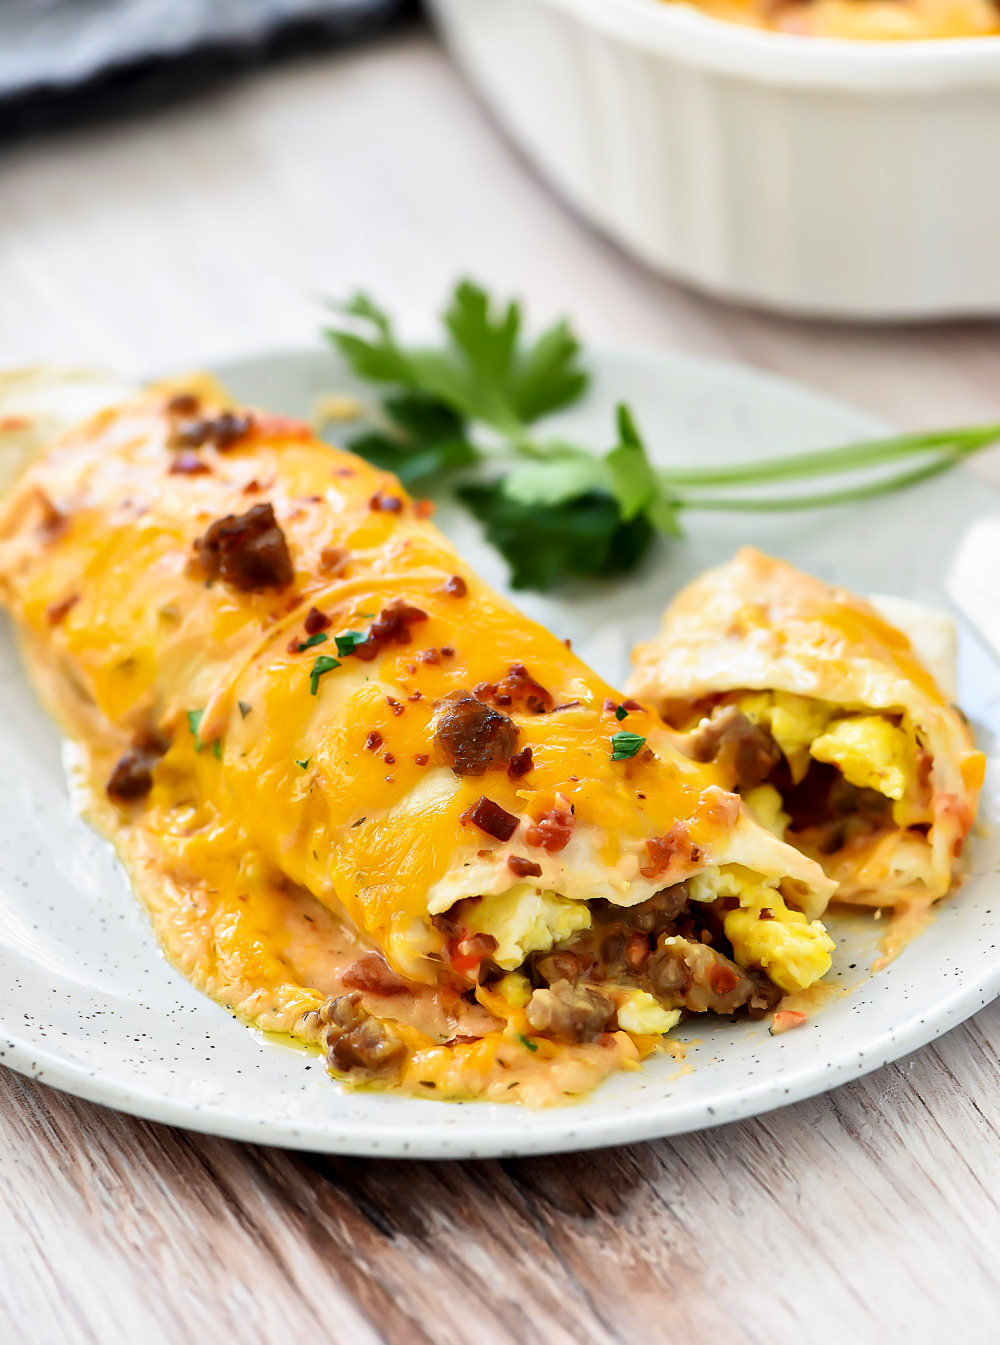 Hearty and delicious sausage, bacon and egg enchiladas.